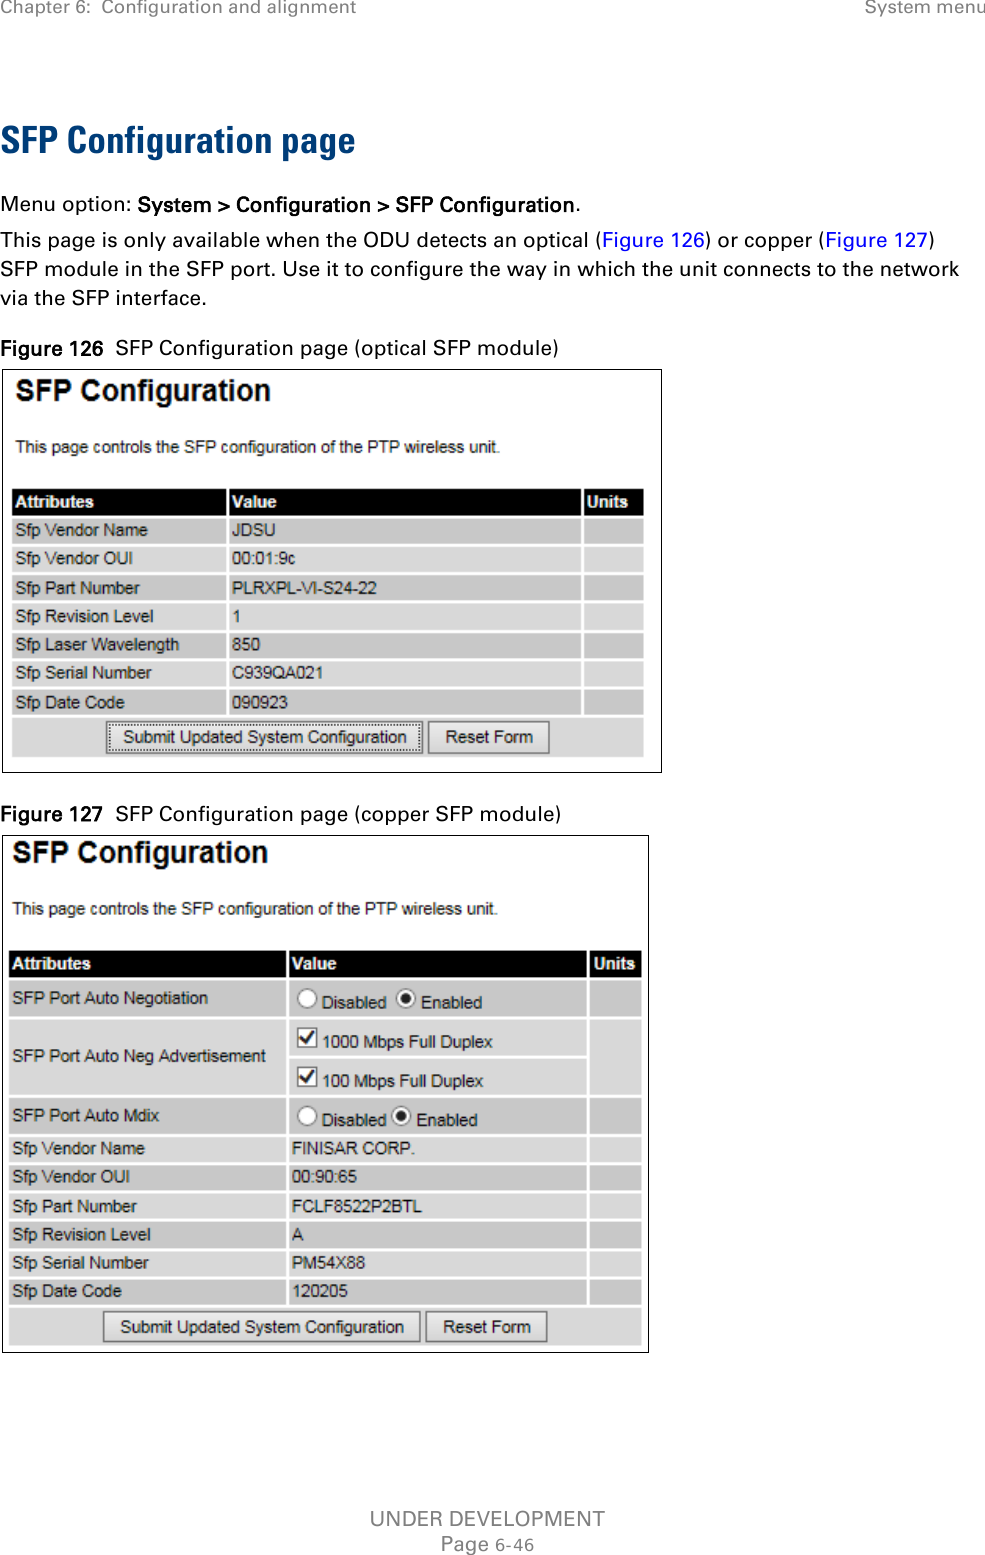 Chapter 6:  Configuration and alignment System menu  SFP Configuration page Menu option: System &gt; Configuration &gt; SFP Configuration. This page is only available when the ODU detects an optical (Figure 126) or copper (Figure 127) SFP module in the SFP port. Use it to configure the way in which the unit connects to the network via the SFP interface. Figure 126  SFP Configuration page (optical SFP module)  Figure 127  SFP Configuration page (copper SFP module)   UNDER DEVELOPMENT Page 6-46 